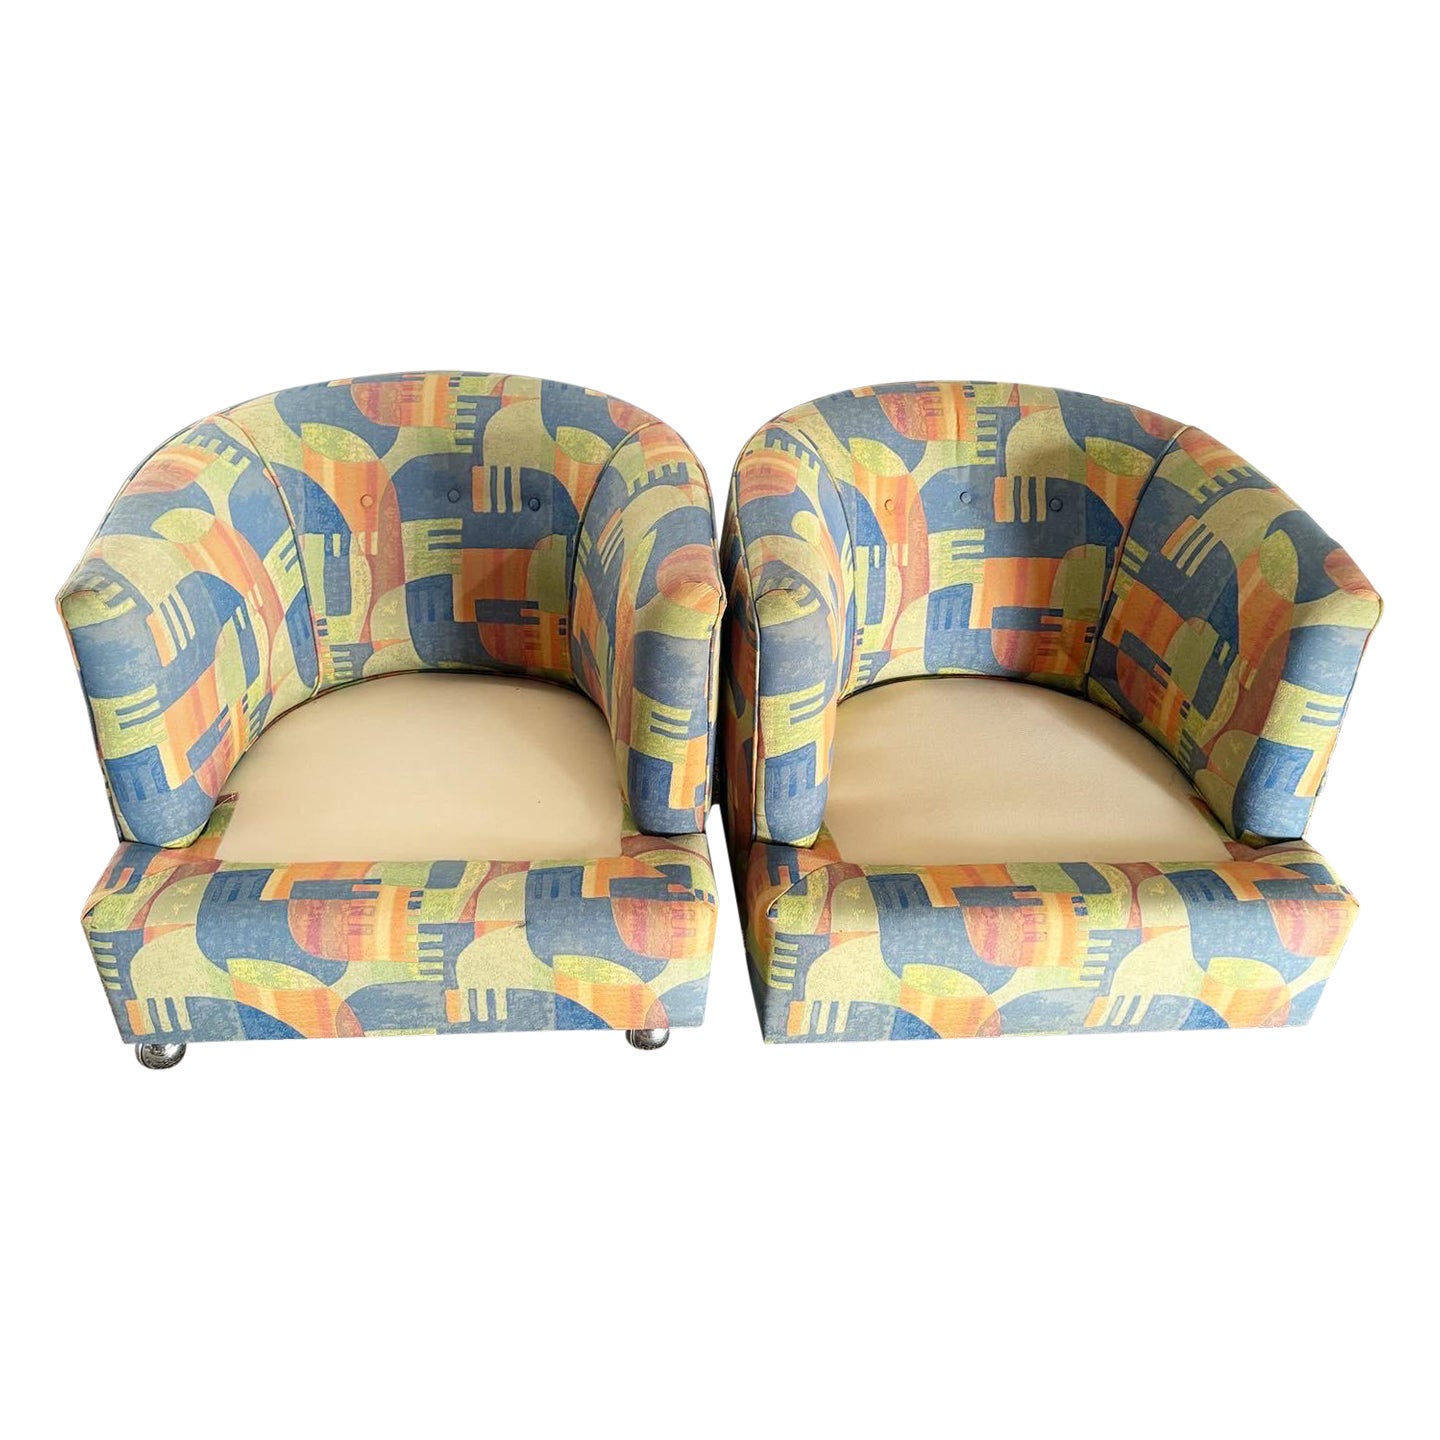 Postmodern Multi Color Barrel Chairs in Chrome Casters For Sale